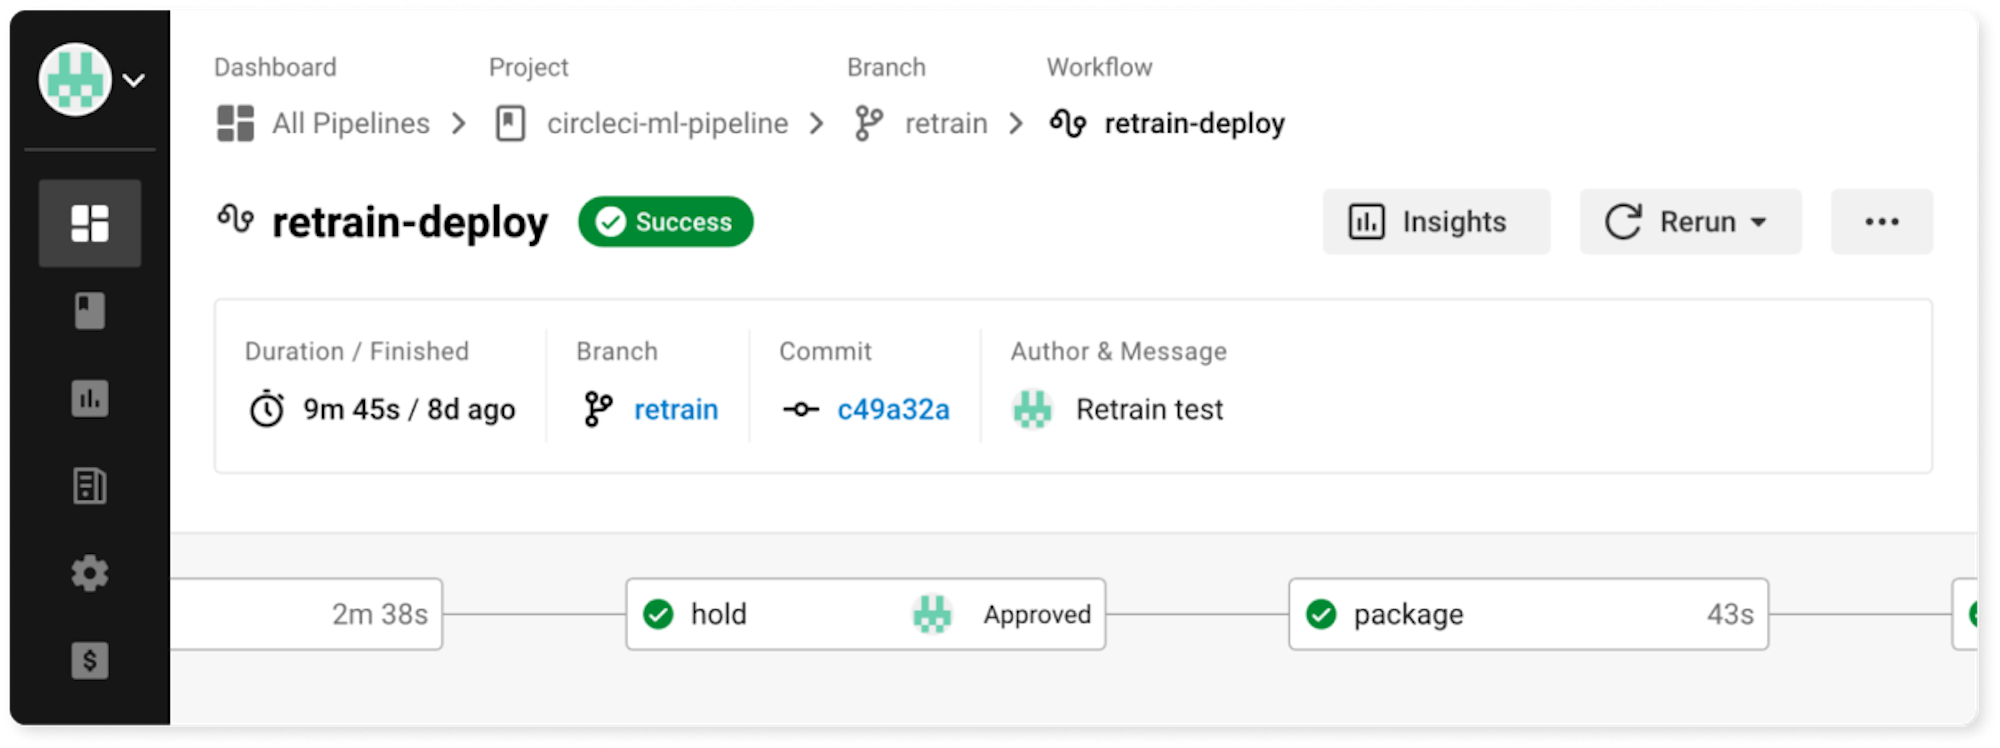 A screenshot showing a CircleCI job that was held and has been approved by the user.